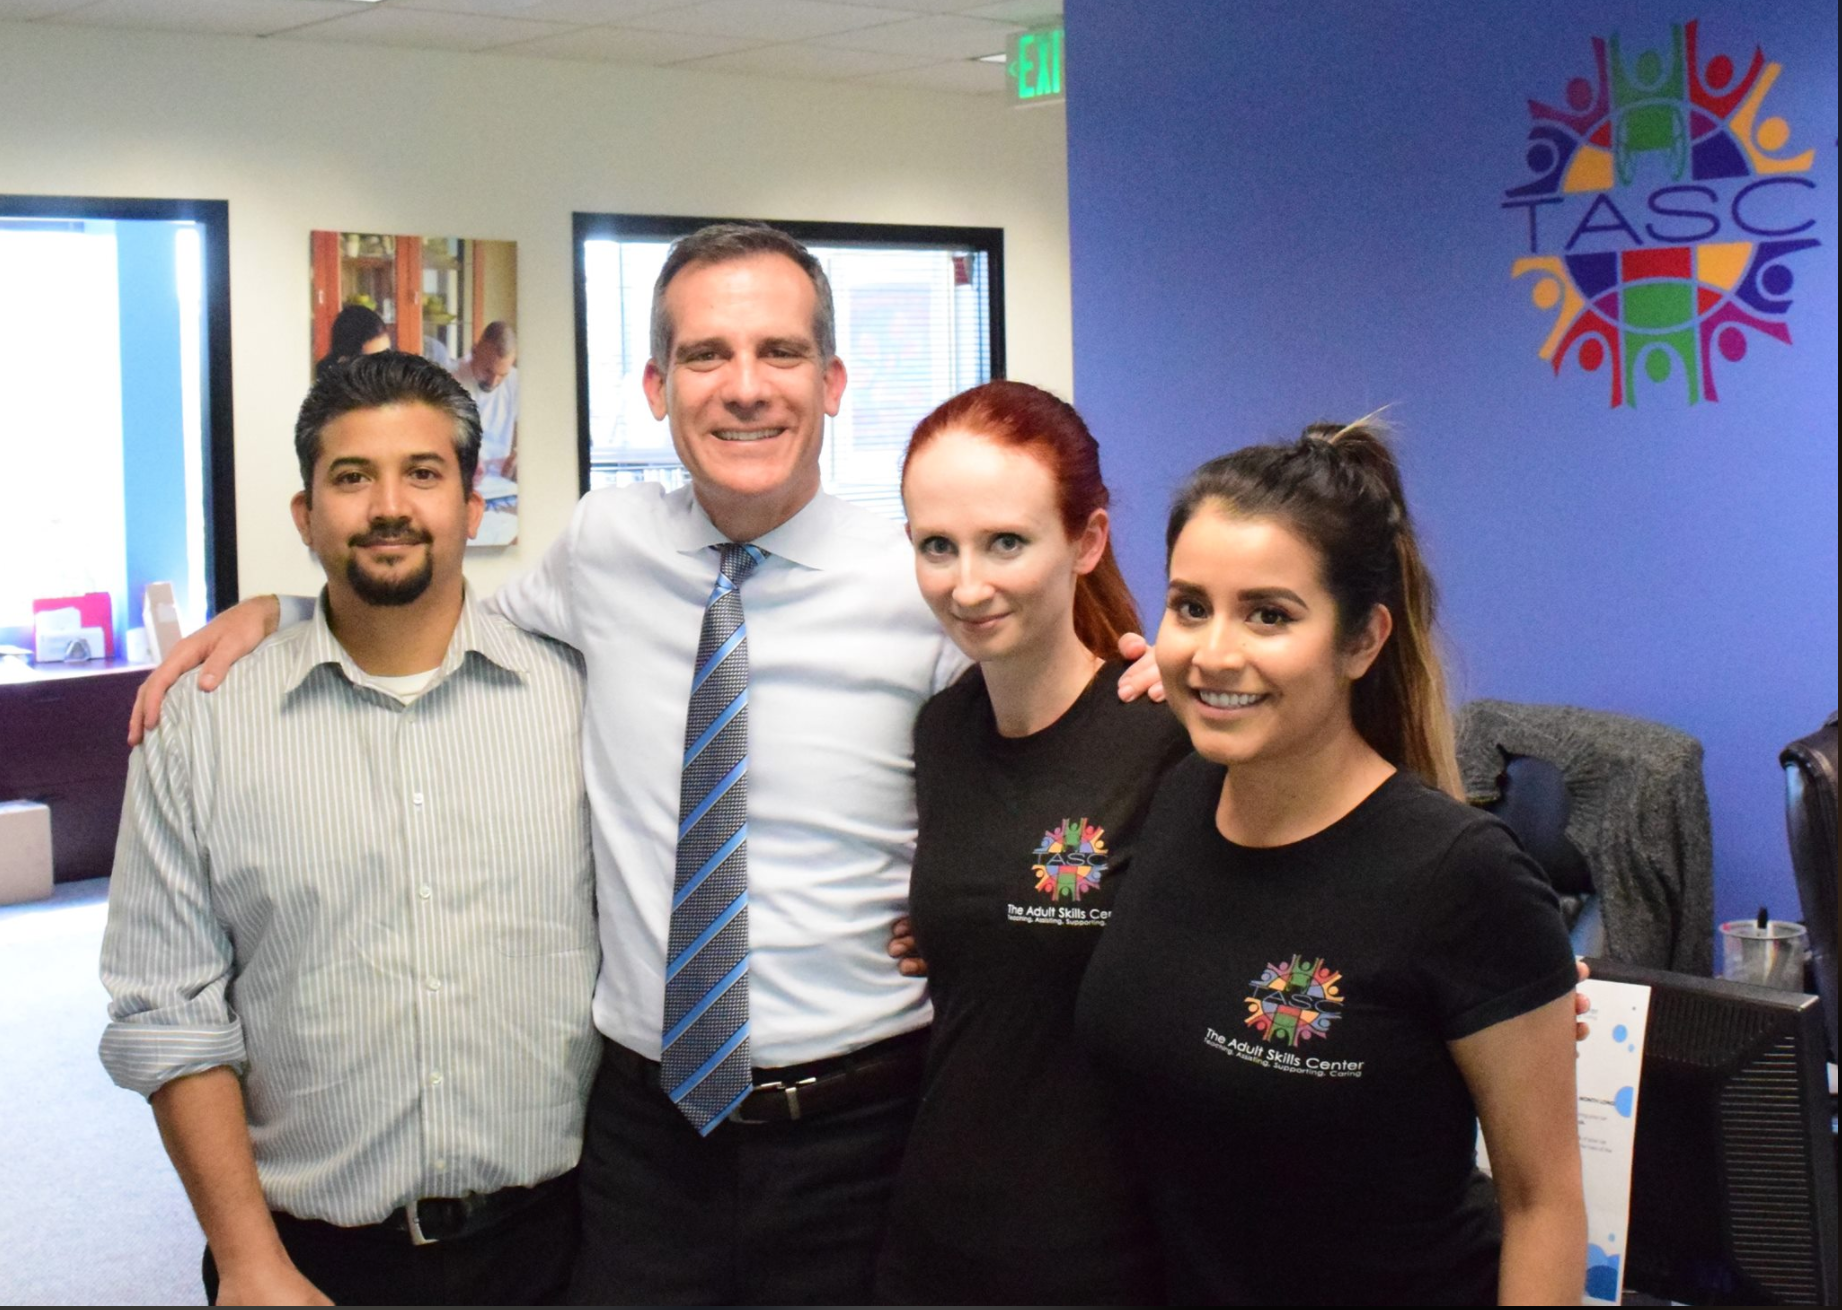 TASC's Deputy Executive Director Dennis Rutnam, Clinical Director Alona Yorkshire, and Operations Manager Tania Bartolo with Mayor Eric Garcetti